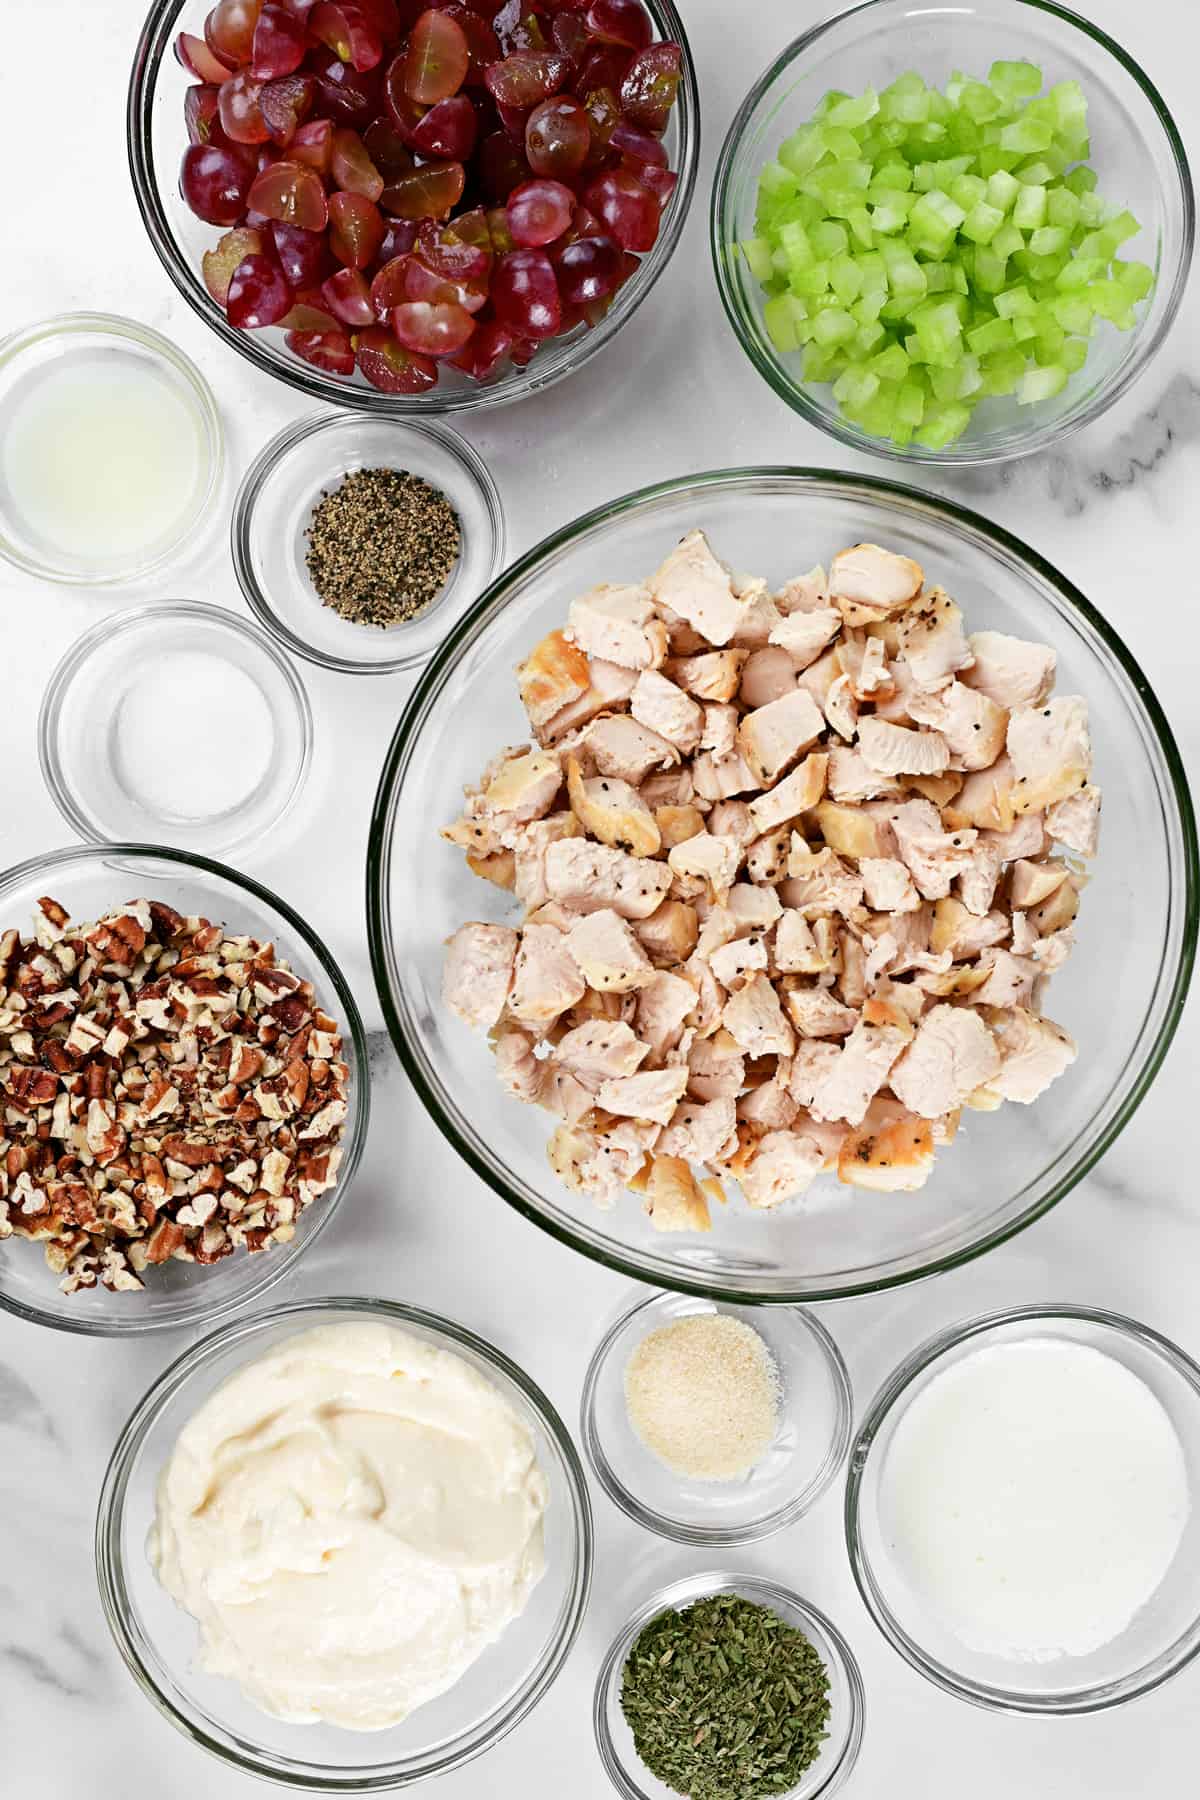 ingredients on bowls in a counter.